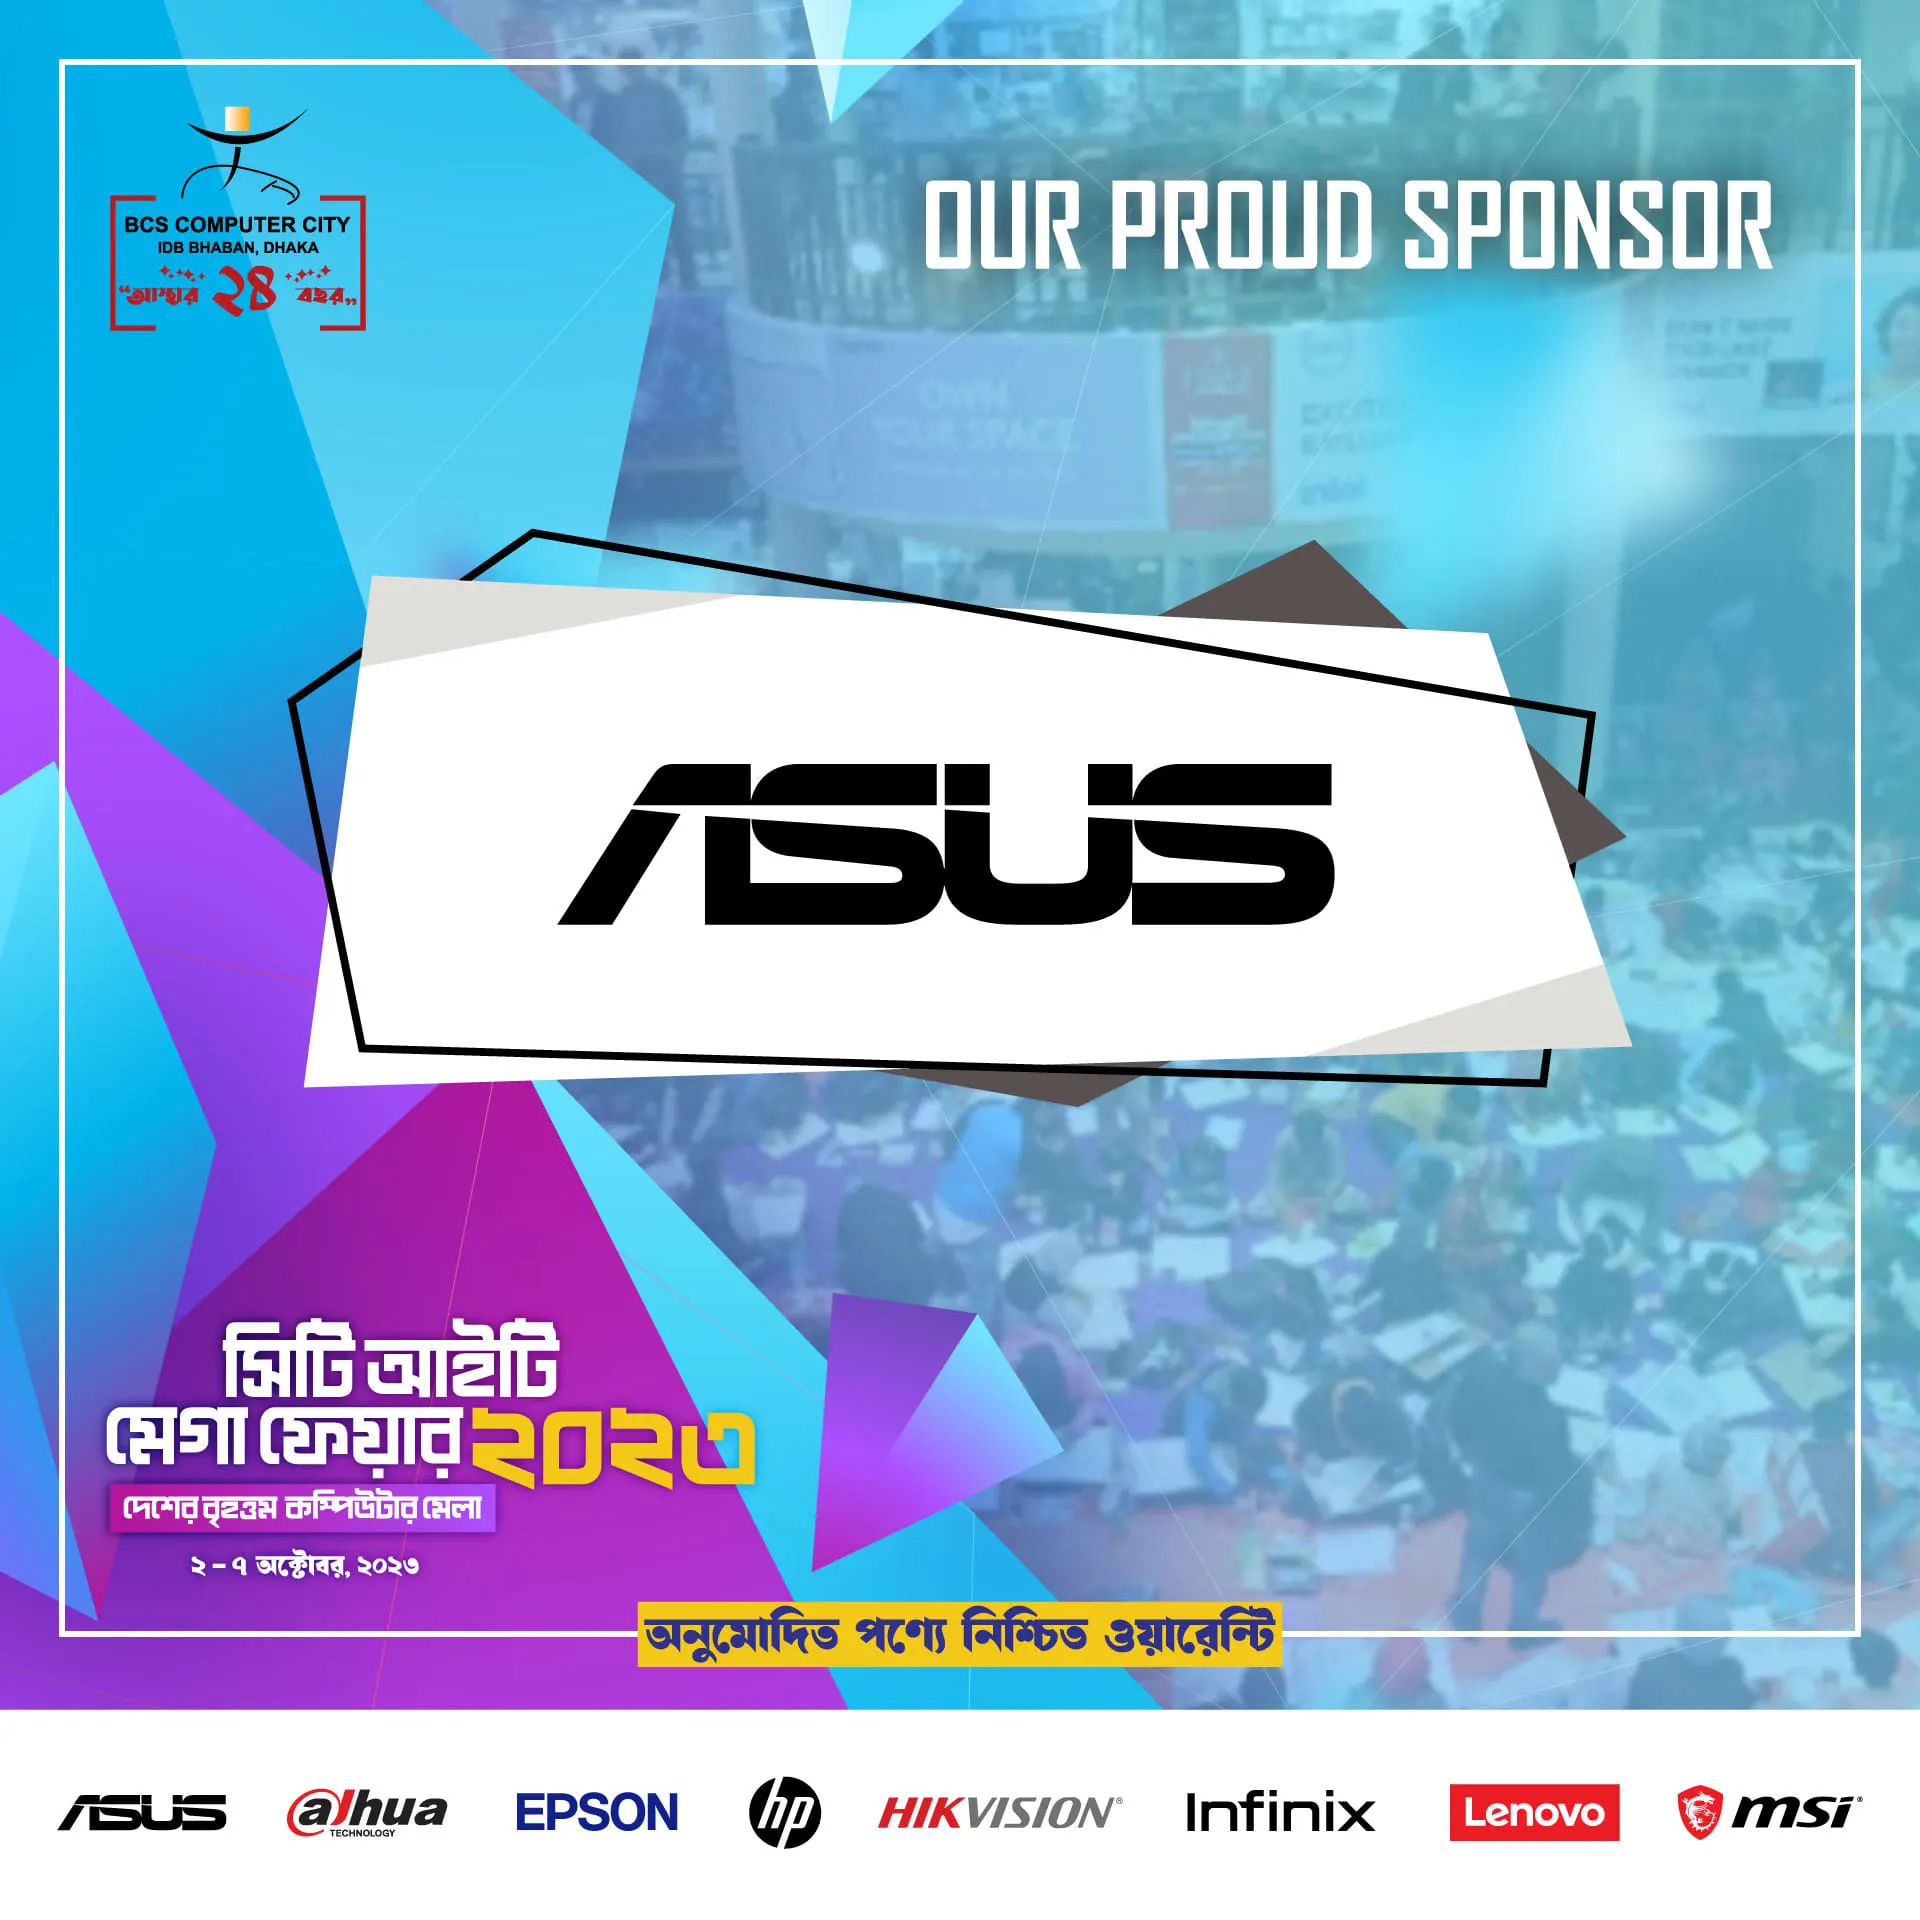 Asus on board as a proud sponsor for our upcoming event